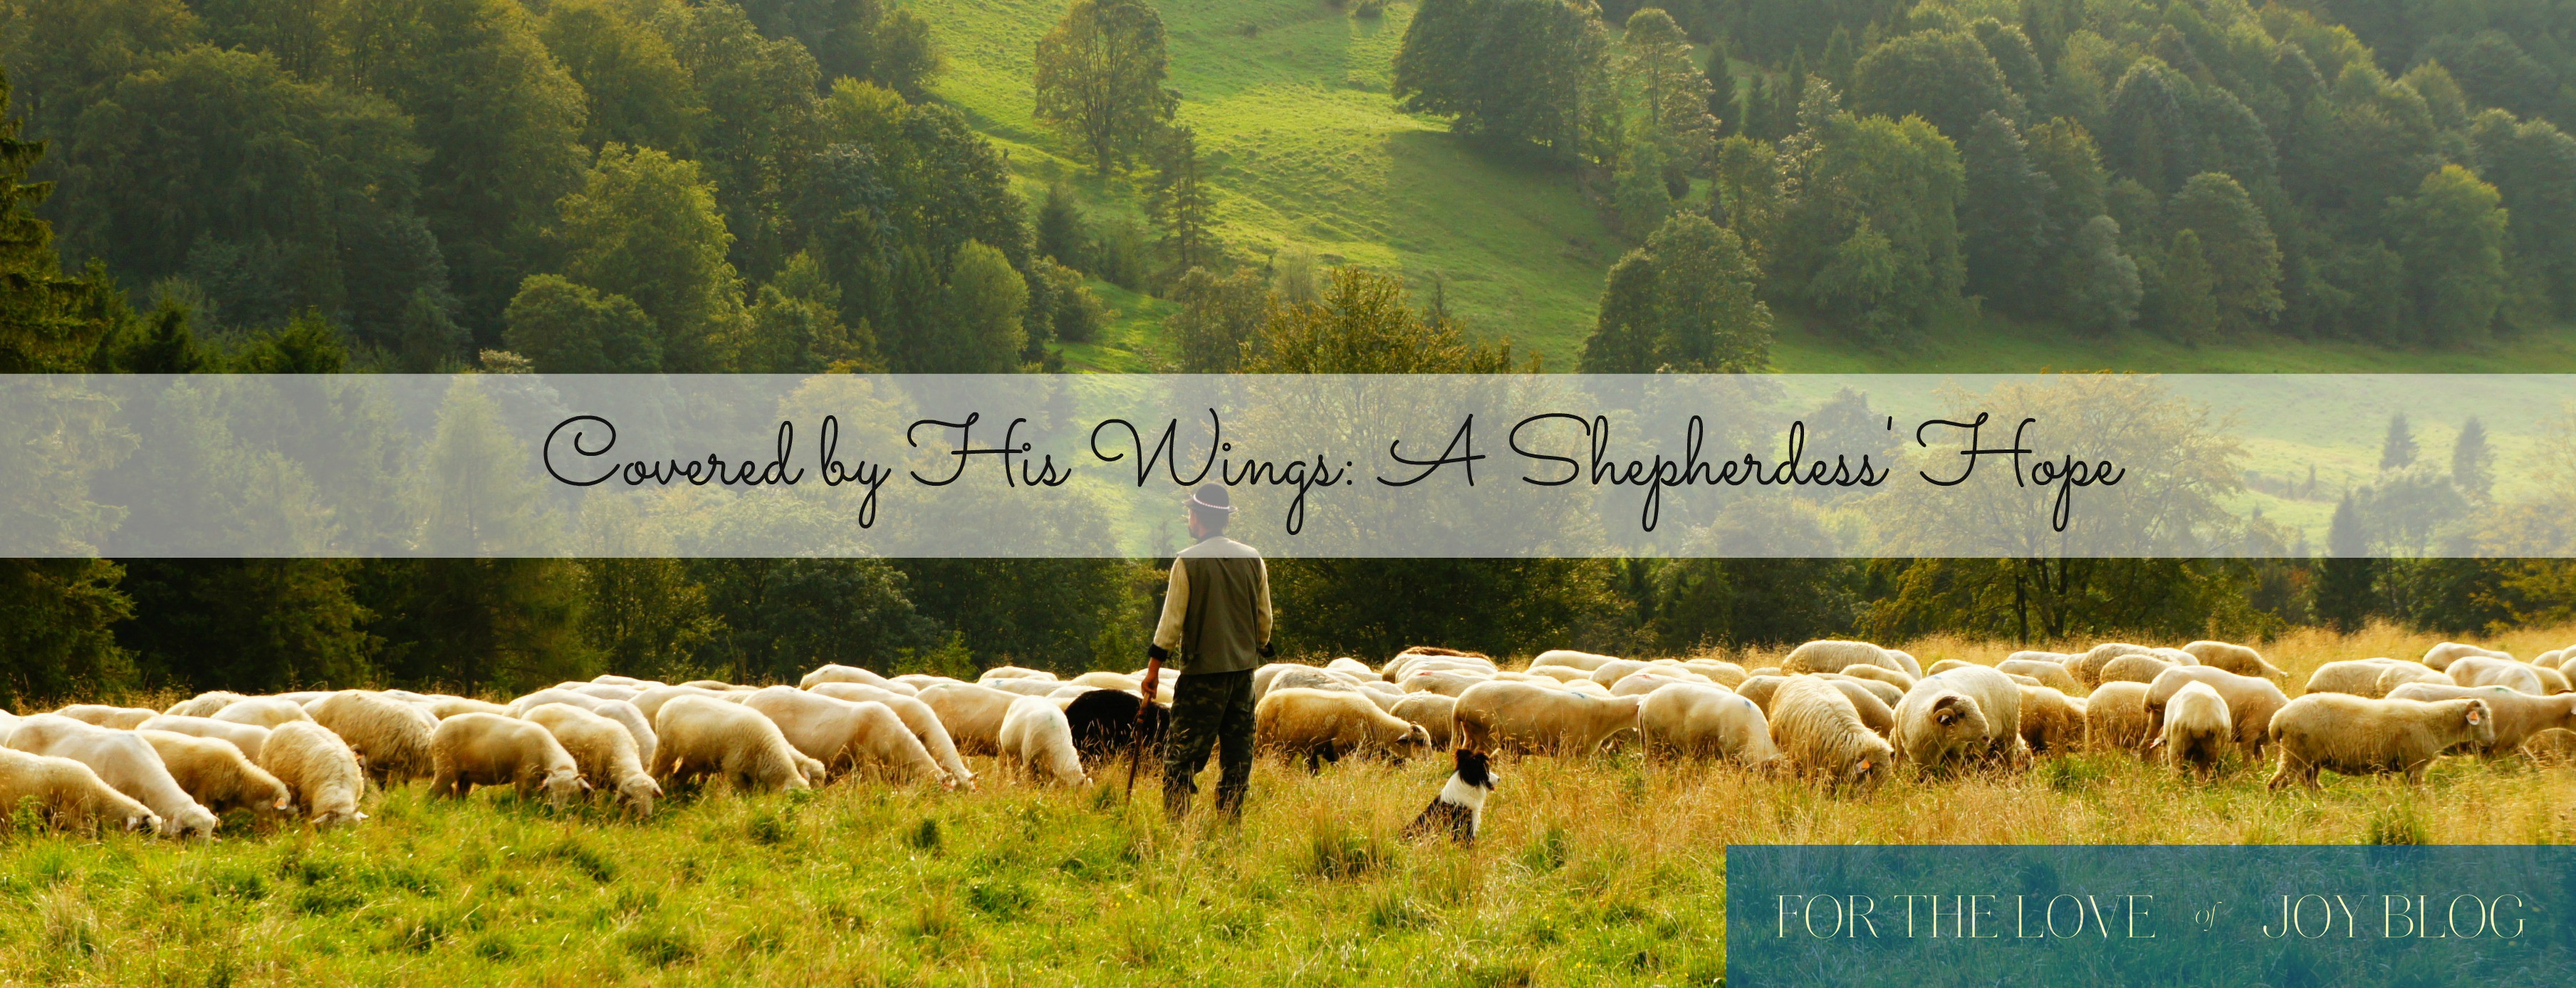 Covered By His Wings: A Shepherdess’ Hope